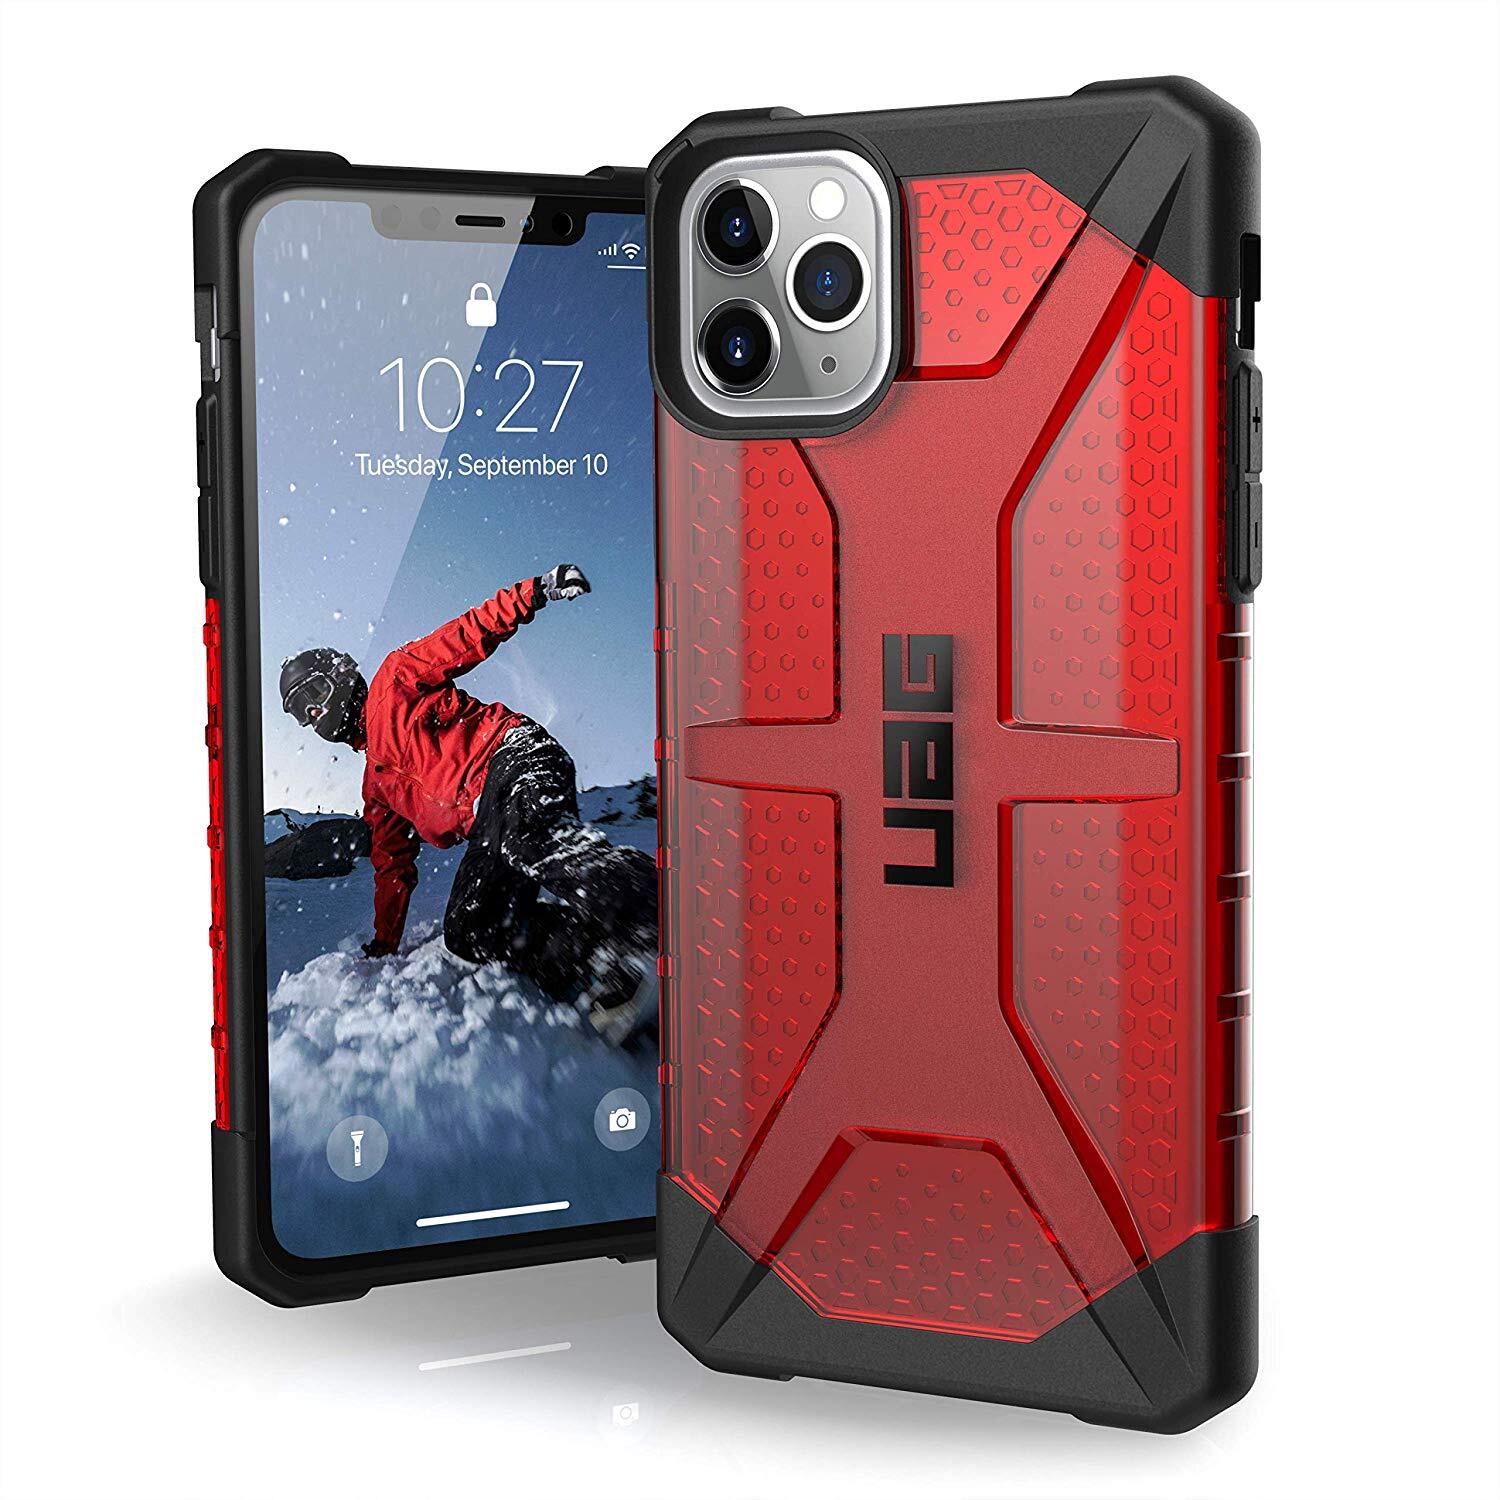 Genuine UAG Military Cover Drop Tested Plasma Rugged Case for iPhone 11